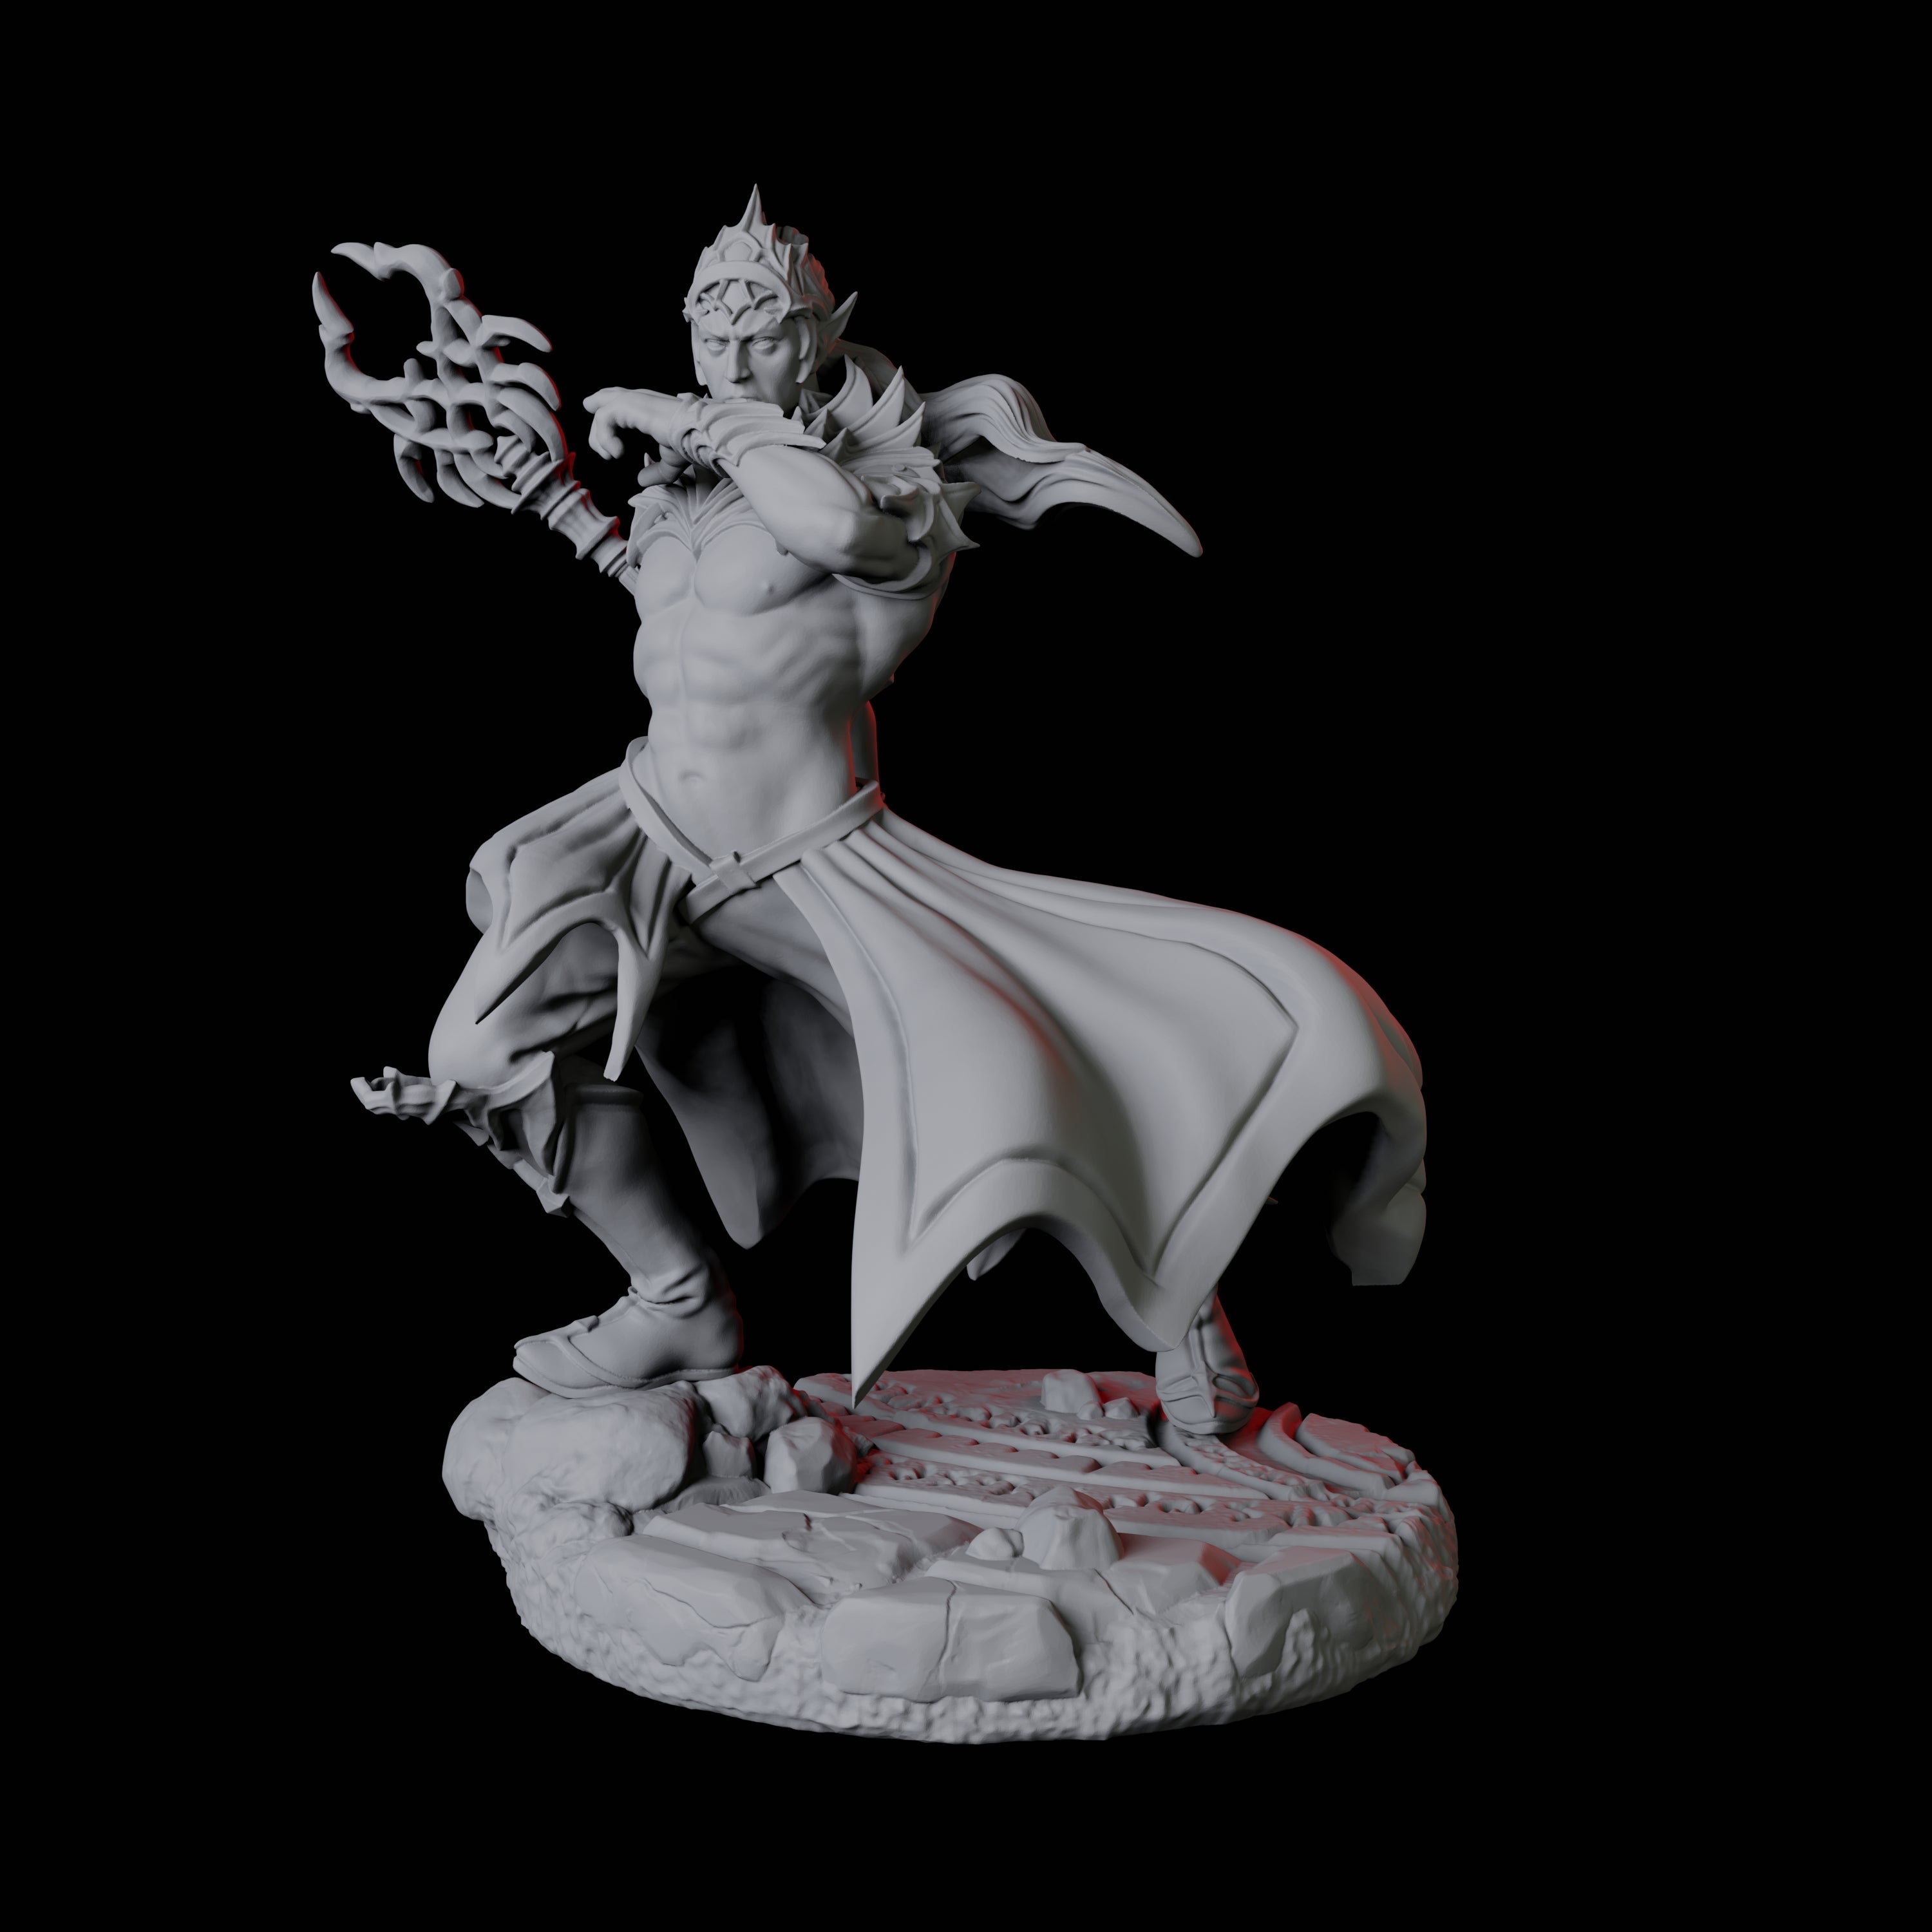 Mage Adept A Miniature for Dungeons and Dragons, Pathfinder or other TTRPGs